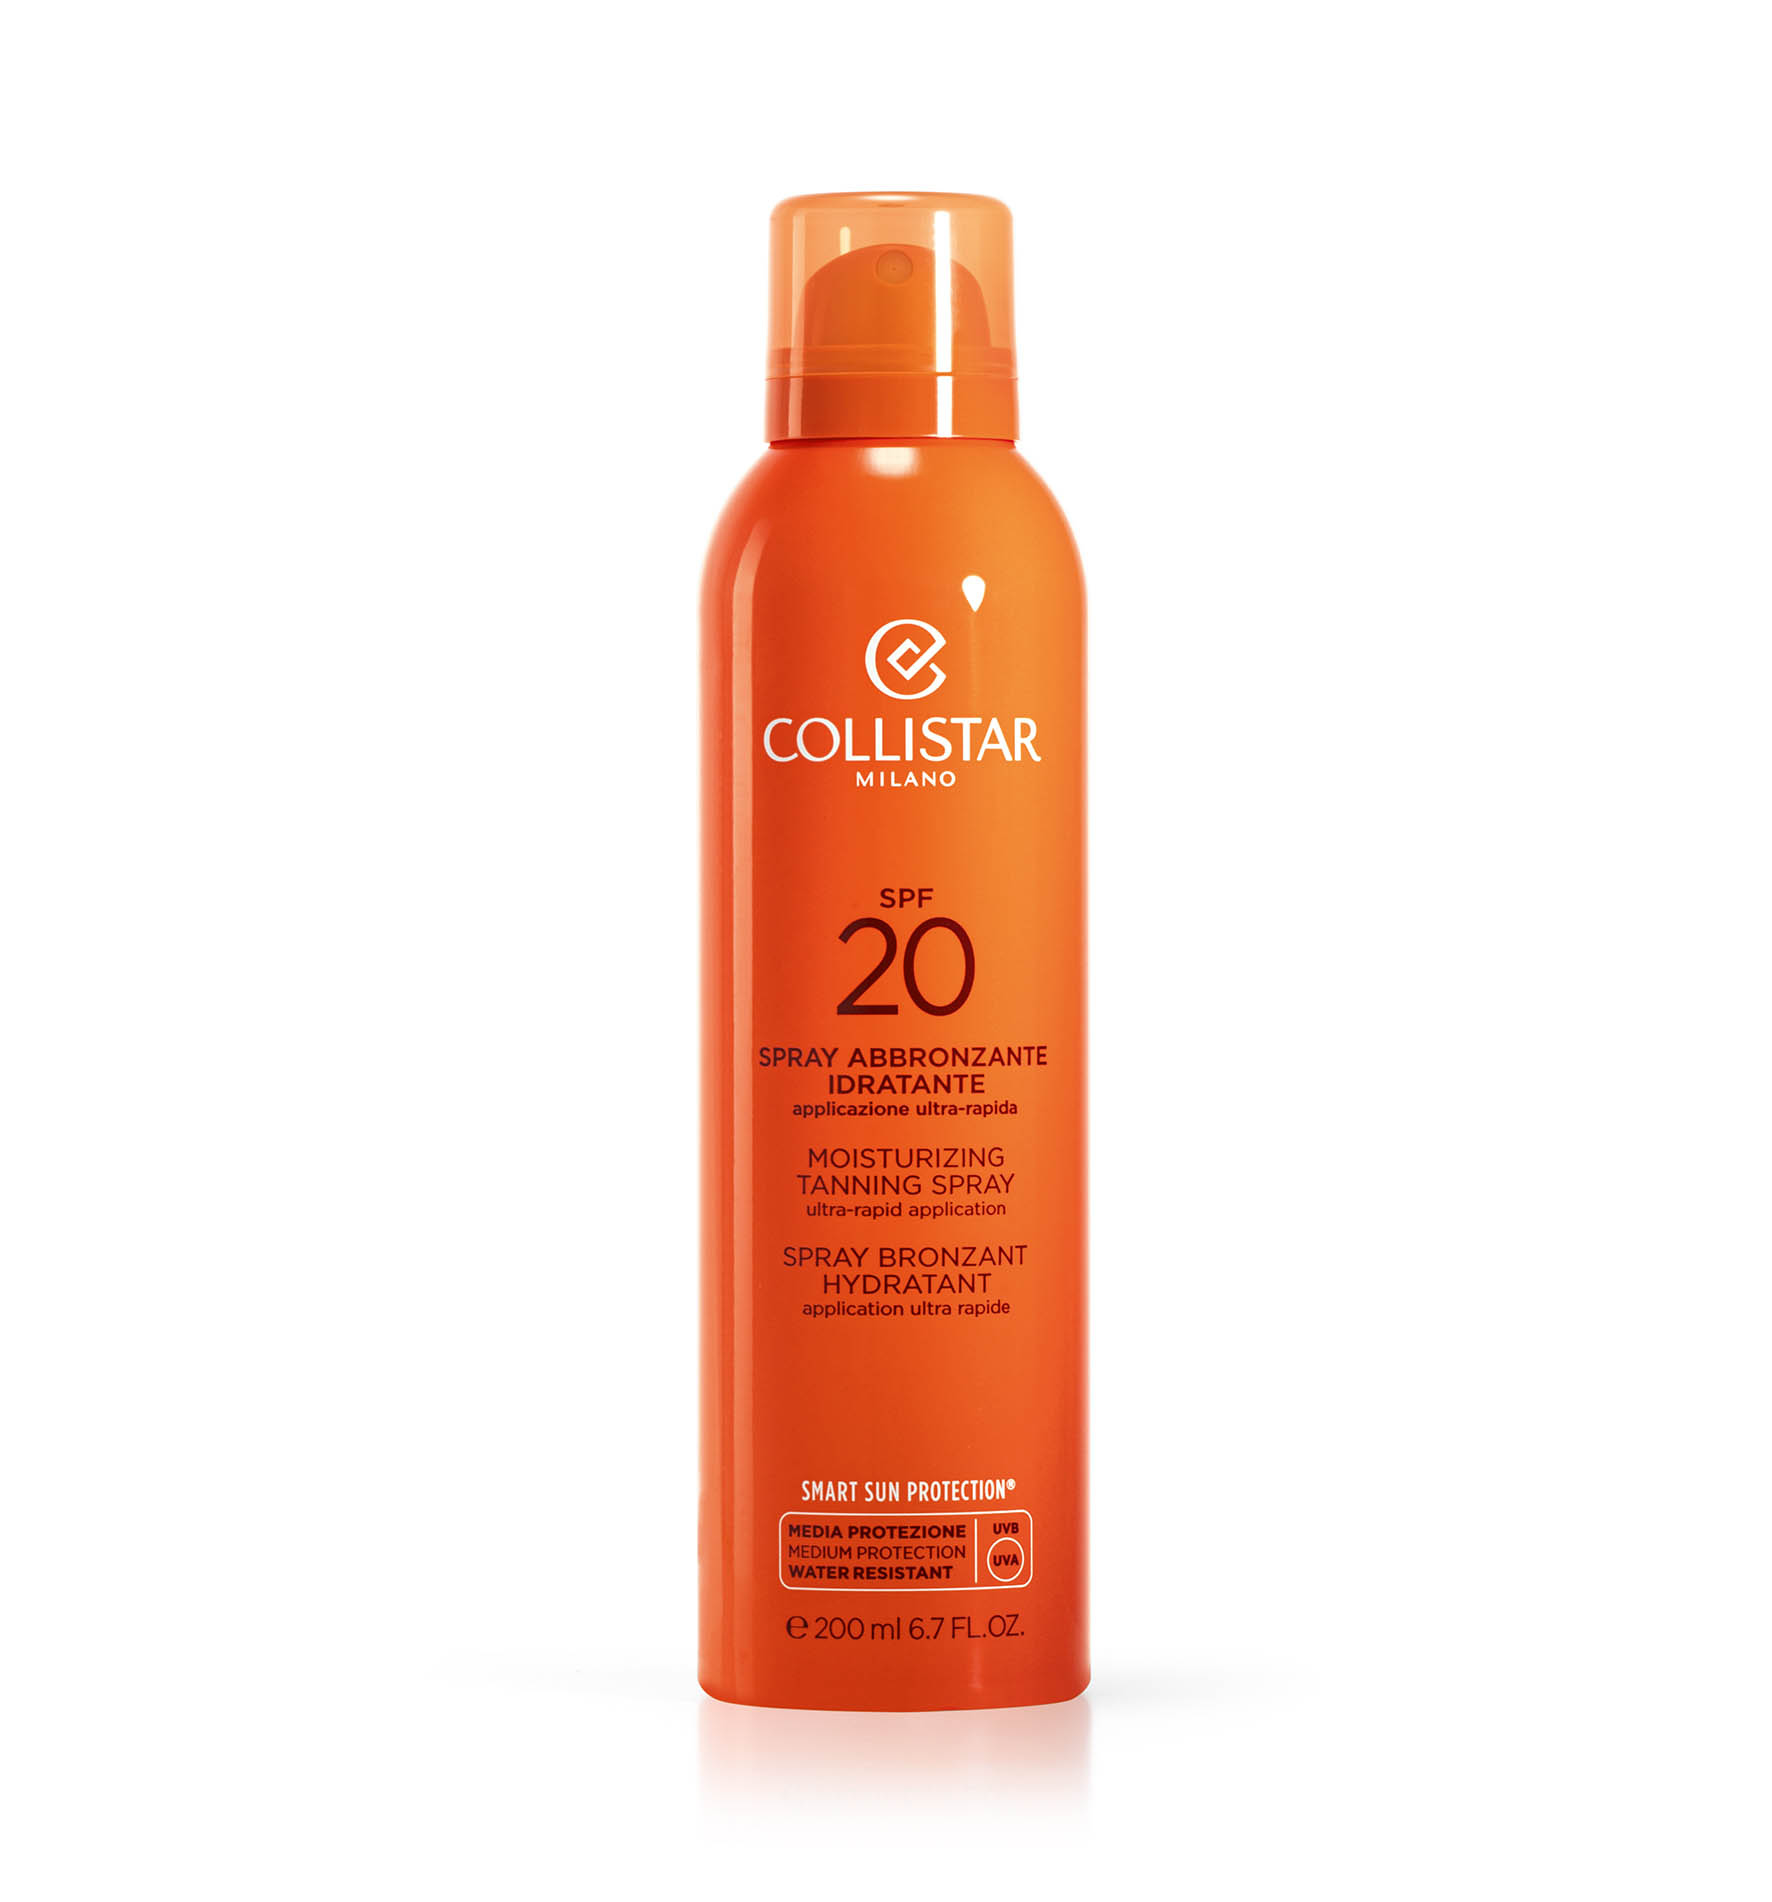 MOISTURIZING TANNING SPRAY SPF 20 - Moderate Protection SPF 15-20 | Collistar - Shop Online Ufficiale